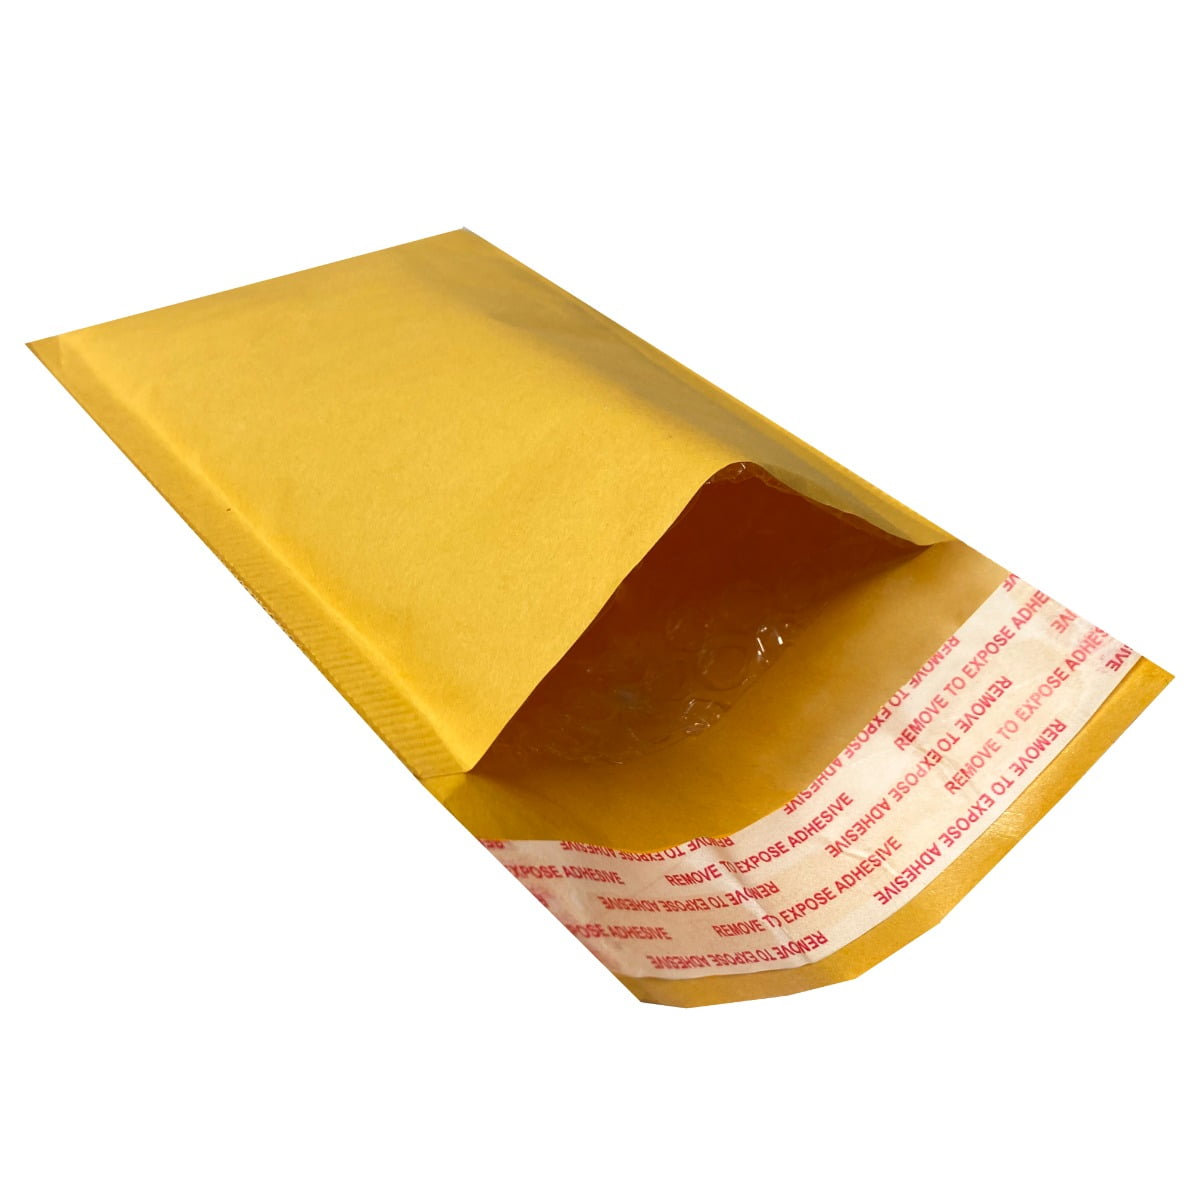 500 #000 4x8 Bubble Mailers Padded Envelopes Bags SelfSeal Usa #000 